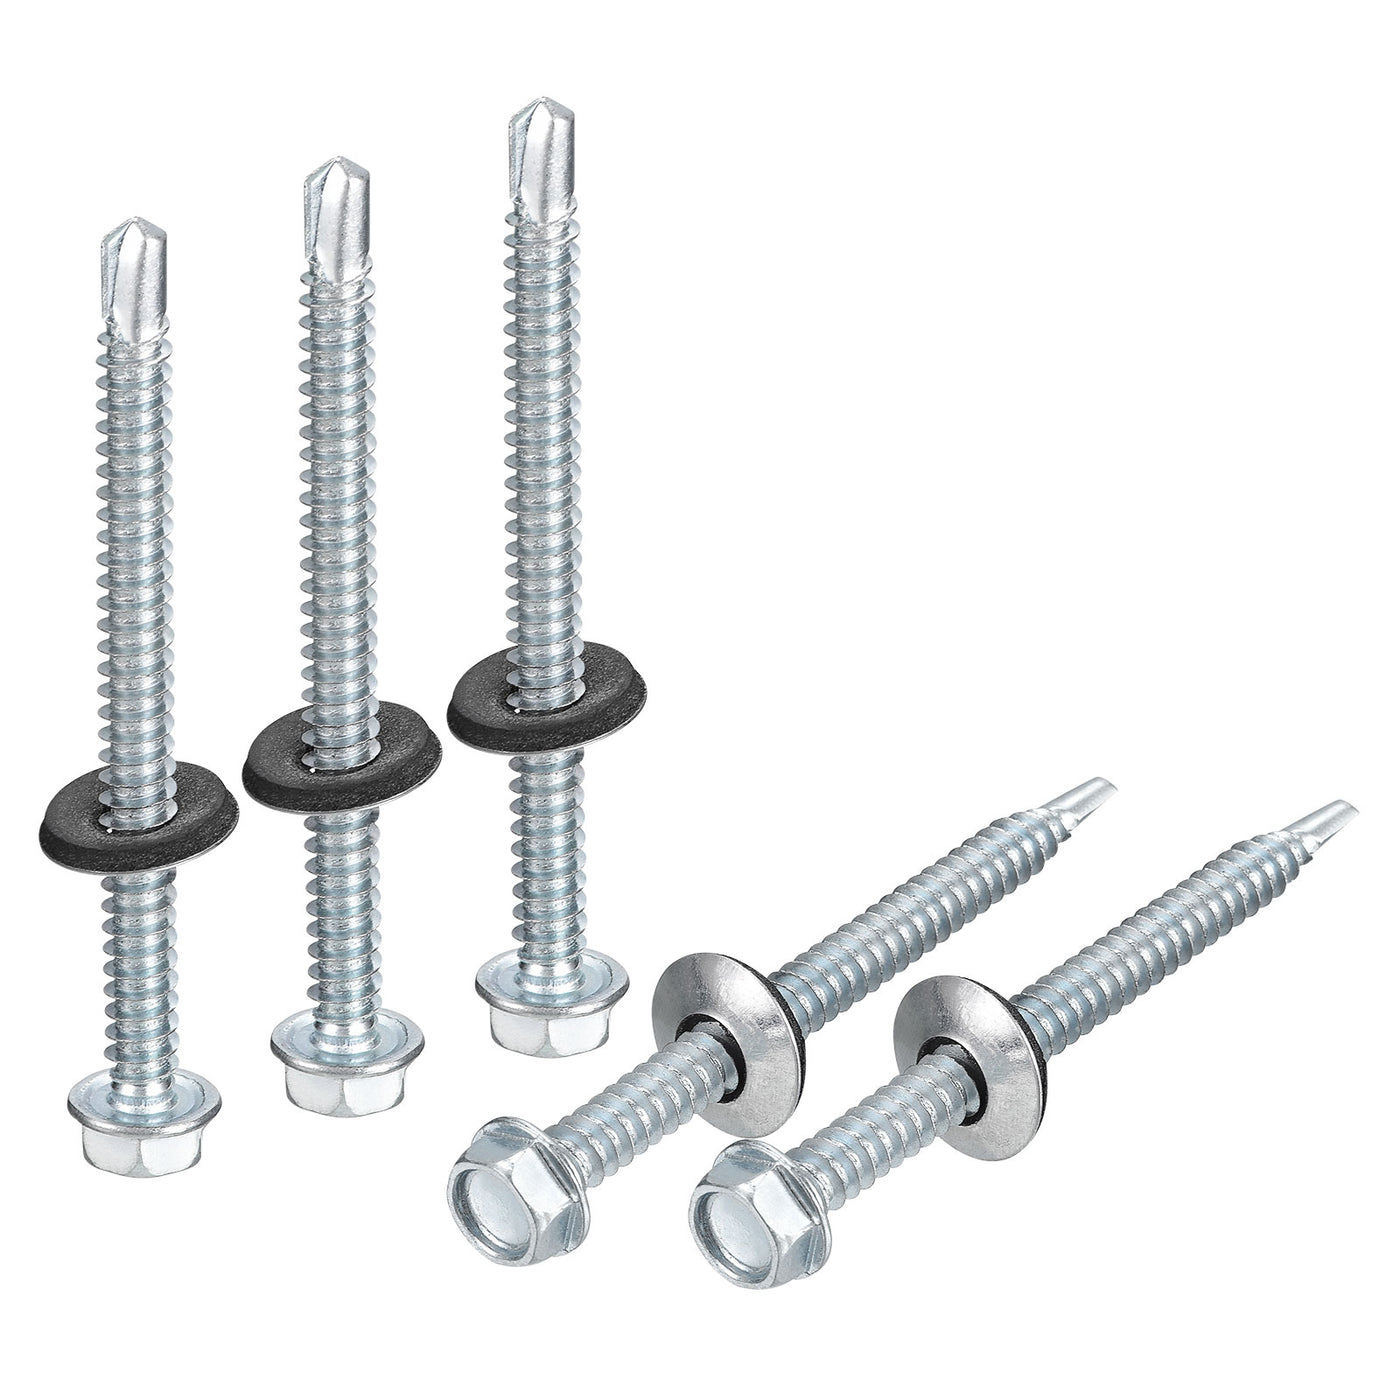 uxcell Uxcell #14 x 2-61/64" Self Drilling Screws, 50pcs Roofing Screws with EPDM Washer